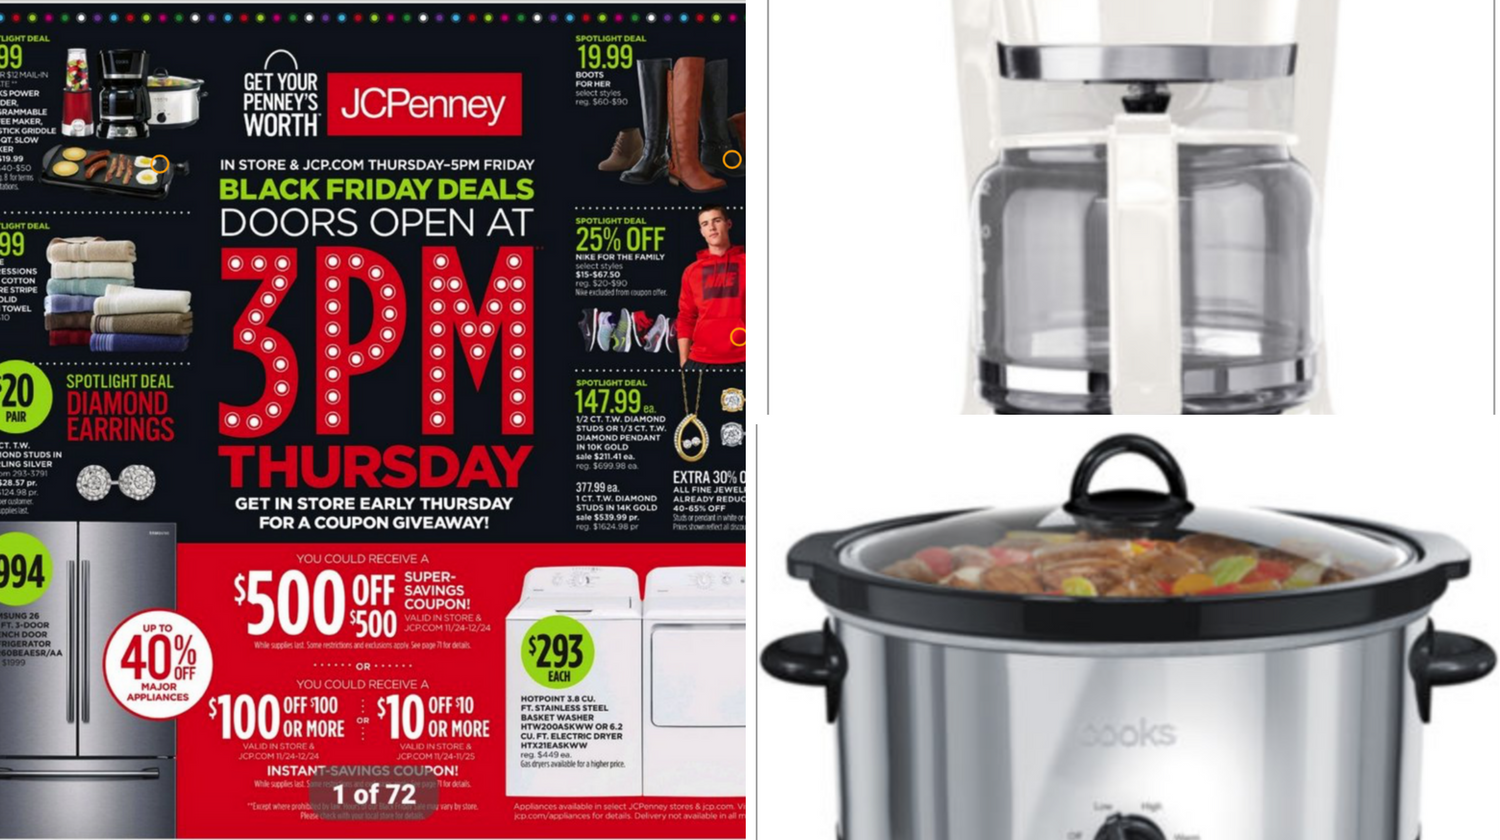 jcpenney black friday sale is perfect chance to update your kitchen